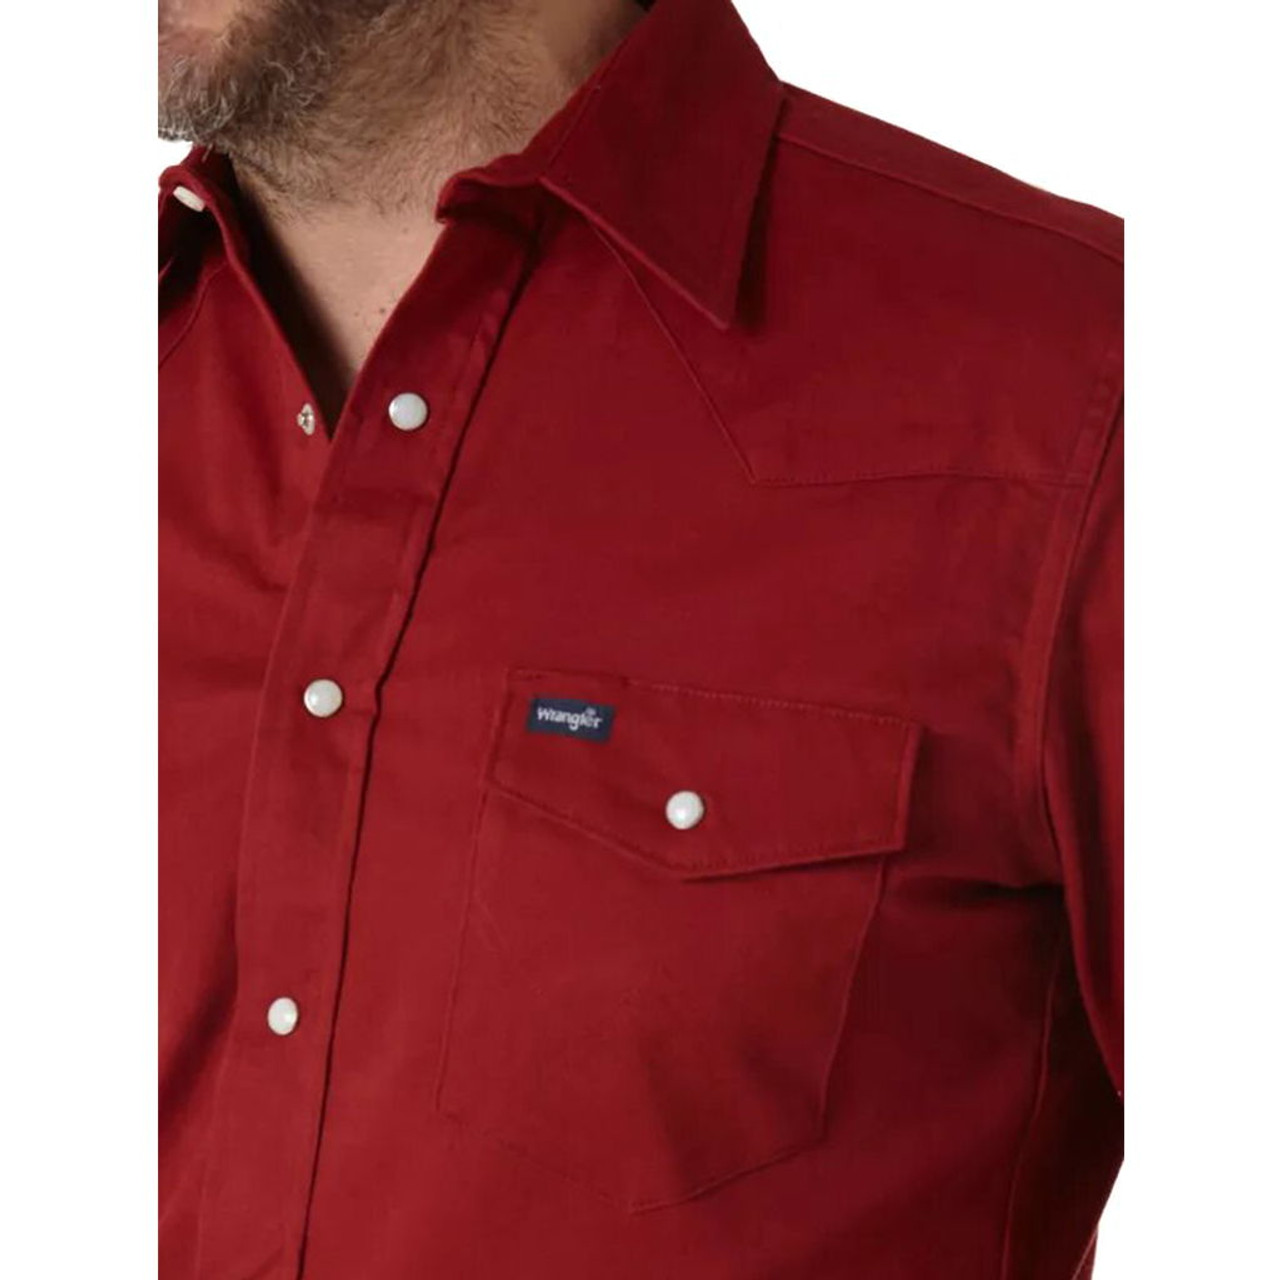 Wrangler Western Snap Shirt at Tractor Supply Co.